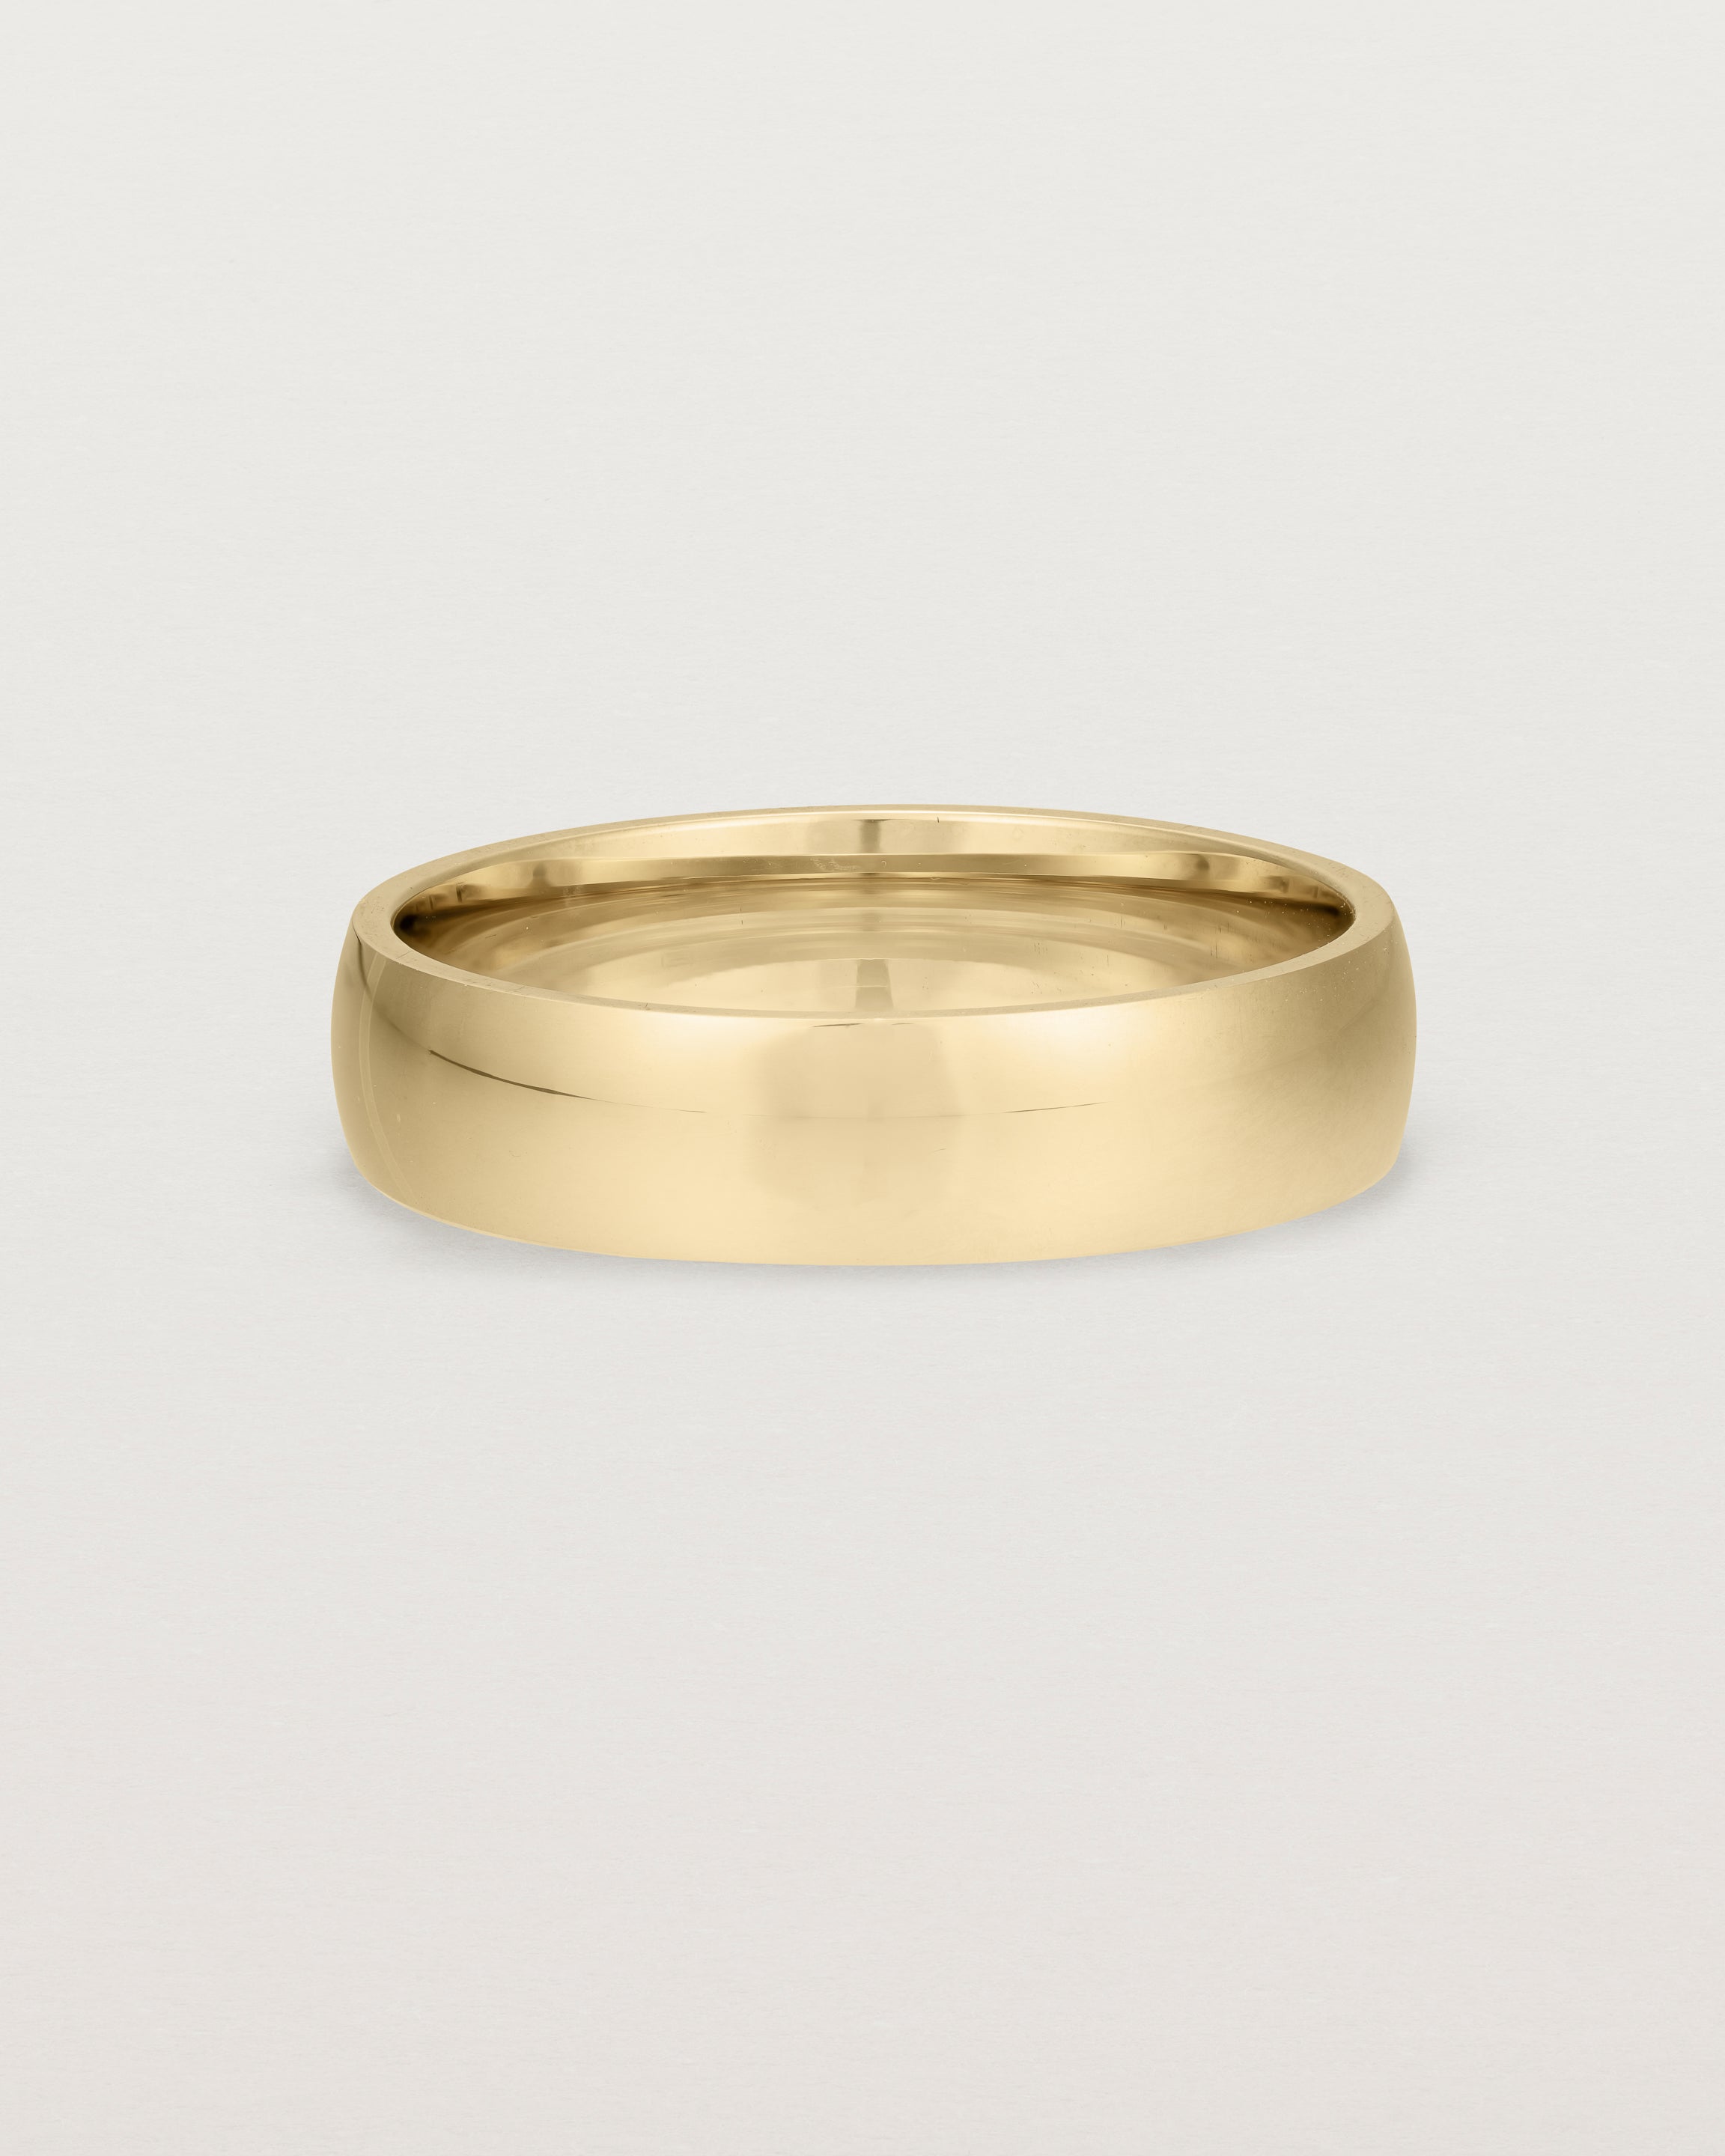 The front view of a 5mm wide heavy wedding ring in yellow gold. 